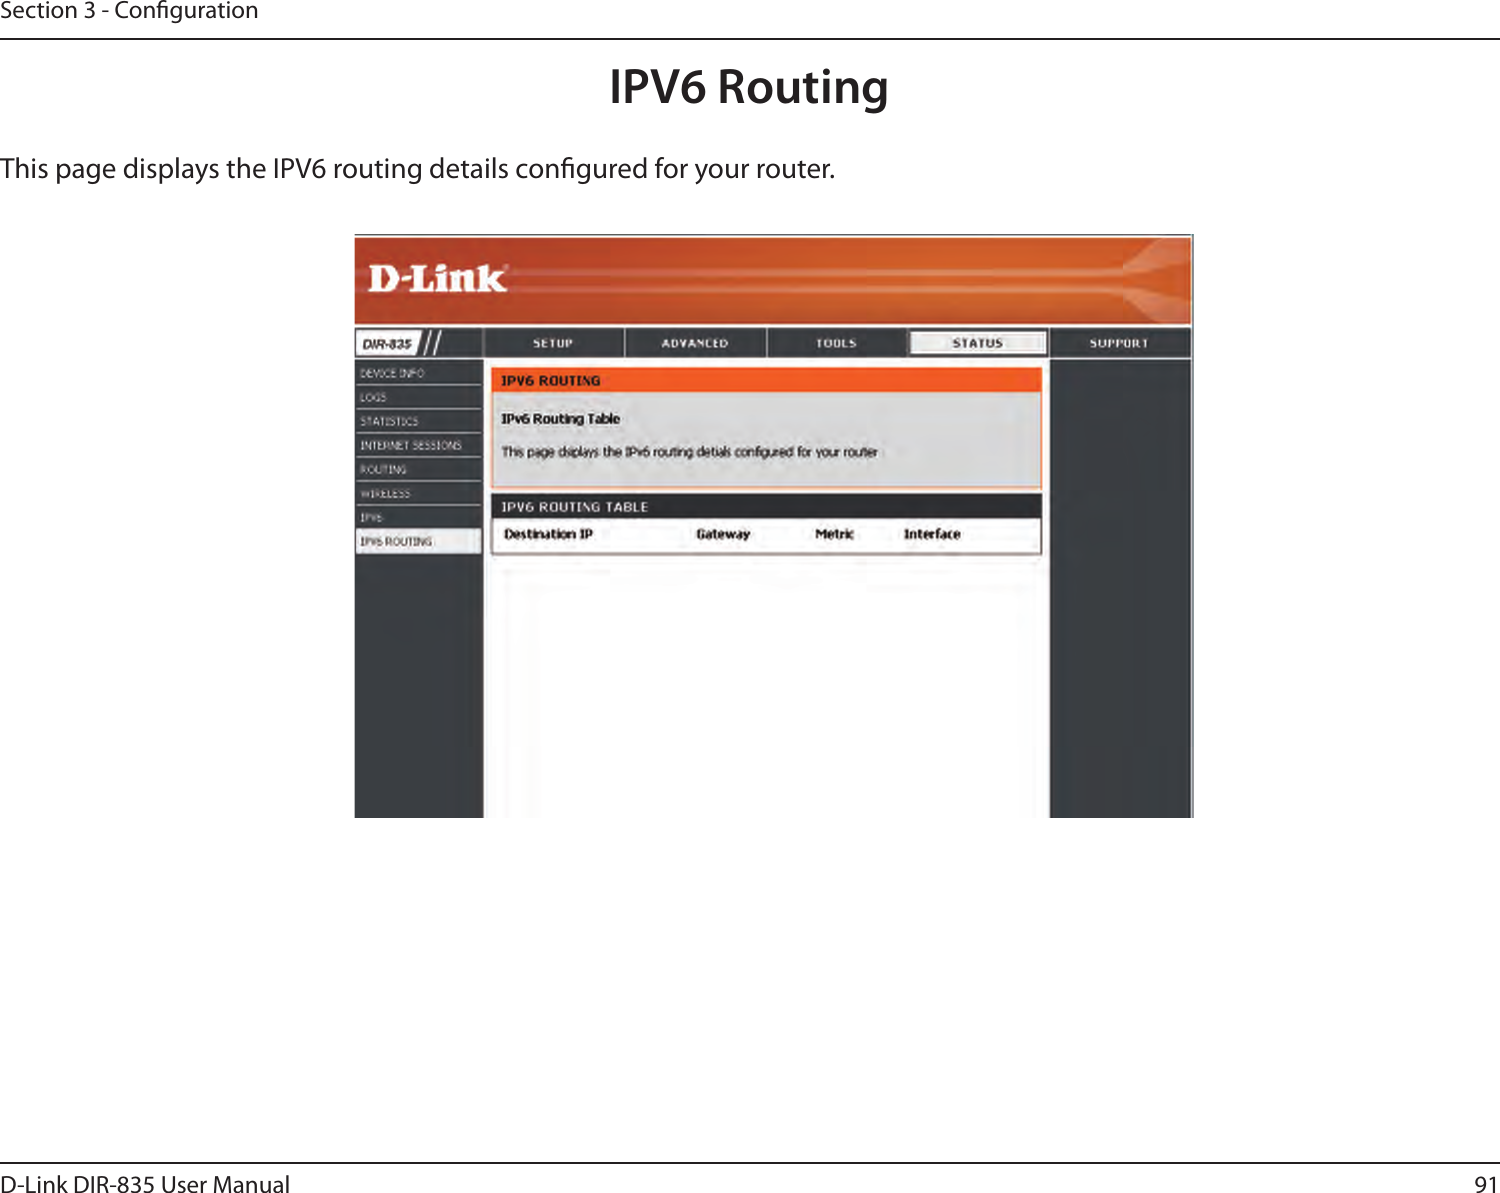 91D-Link DIR-835 User ManualSection 3 - CongurationIPV6 RoutingThis page displays the IPV6 routing details congured for your router. 